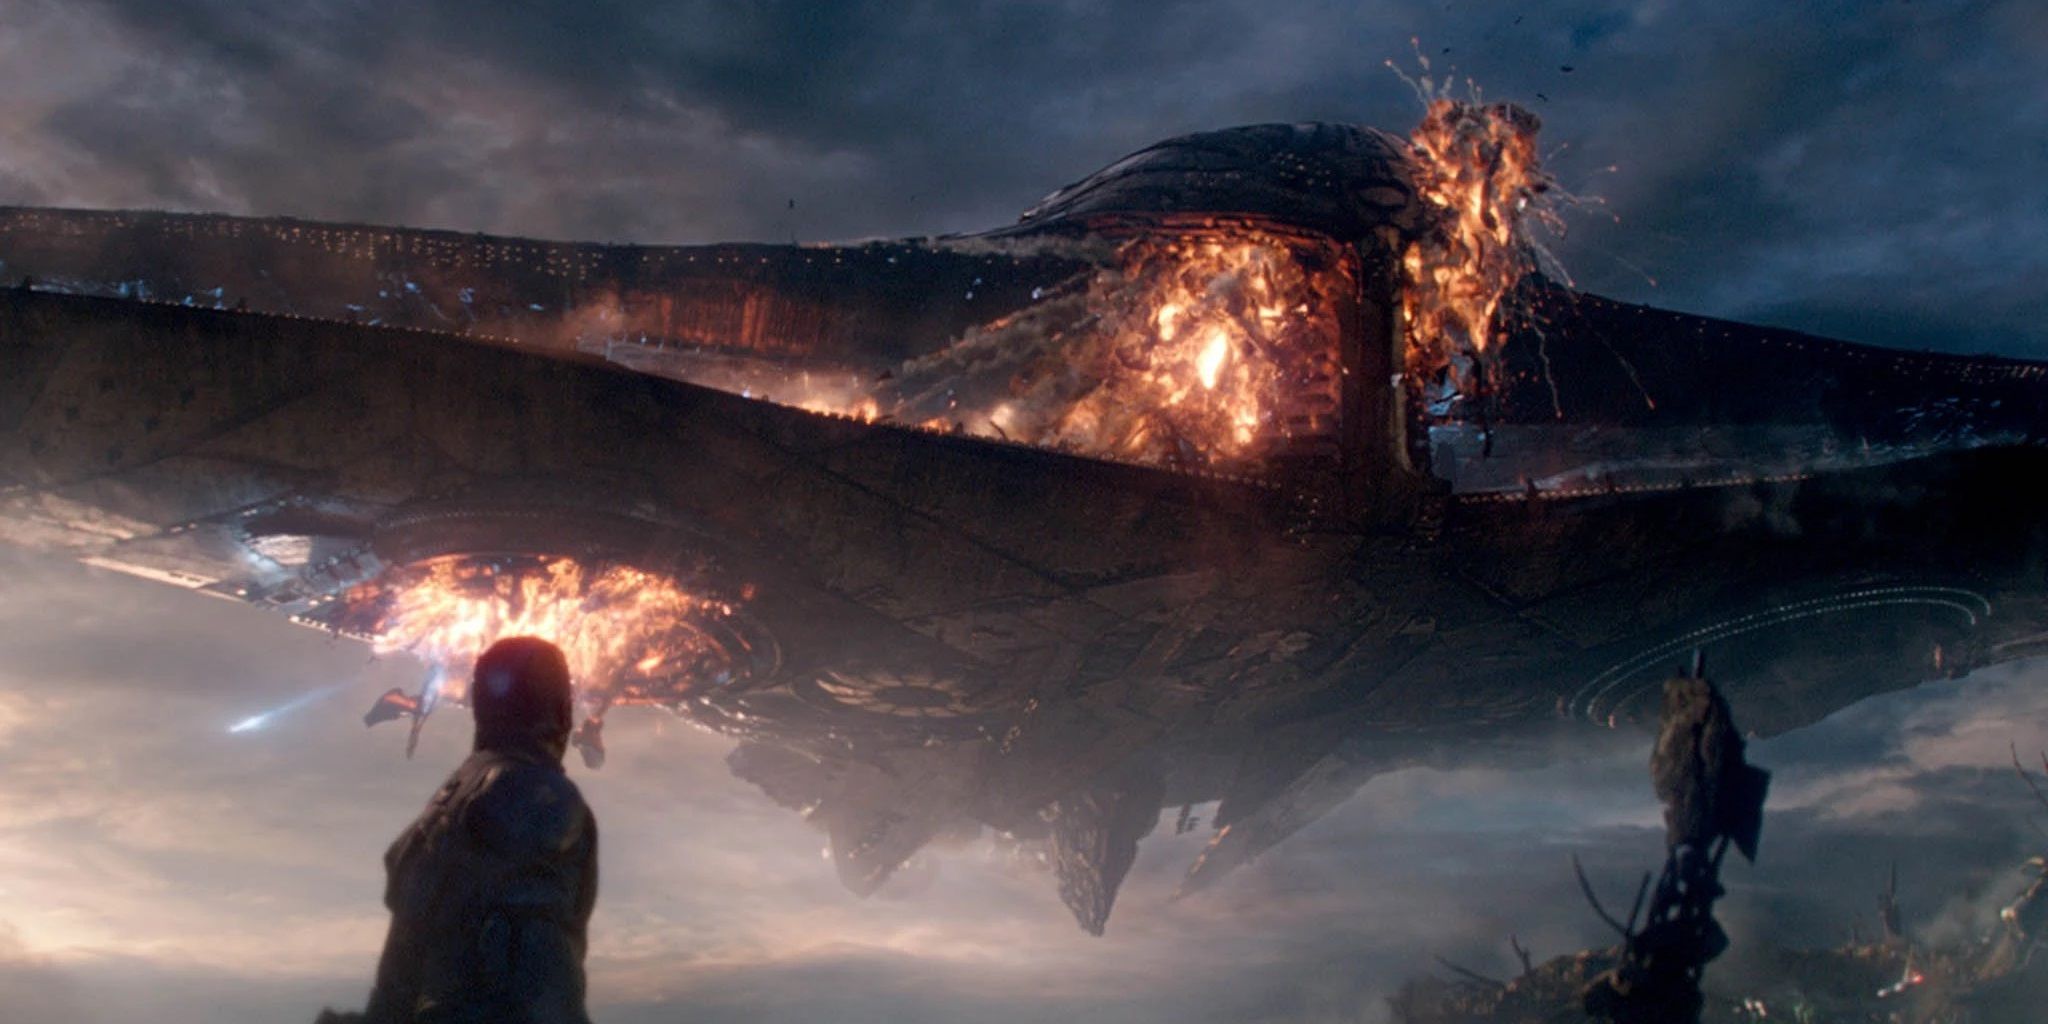 After Captain Marvel flies through, a spaceship burns, in Avengers: Endgame